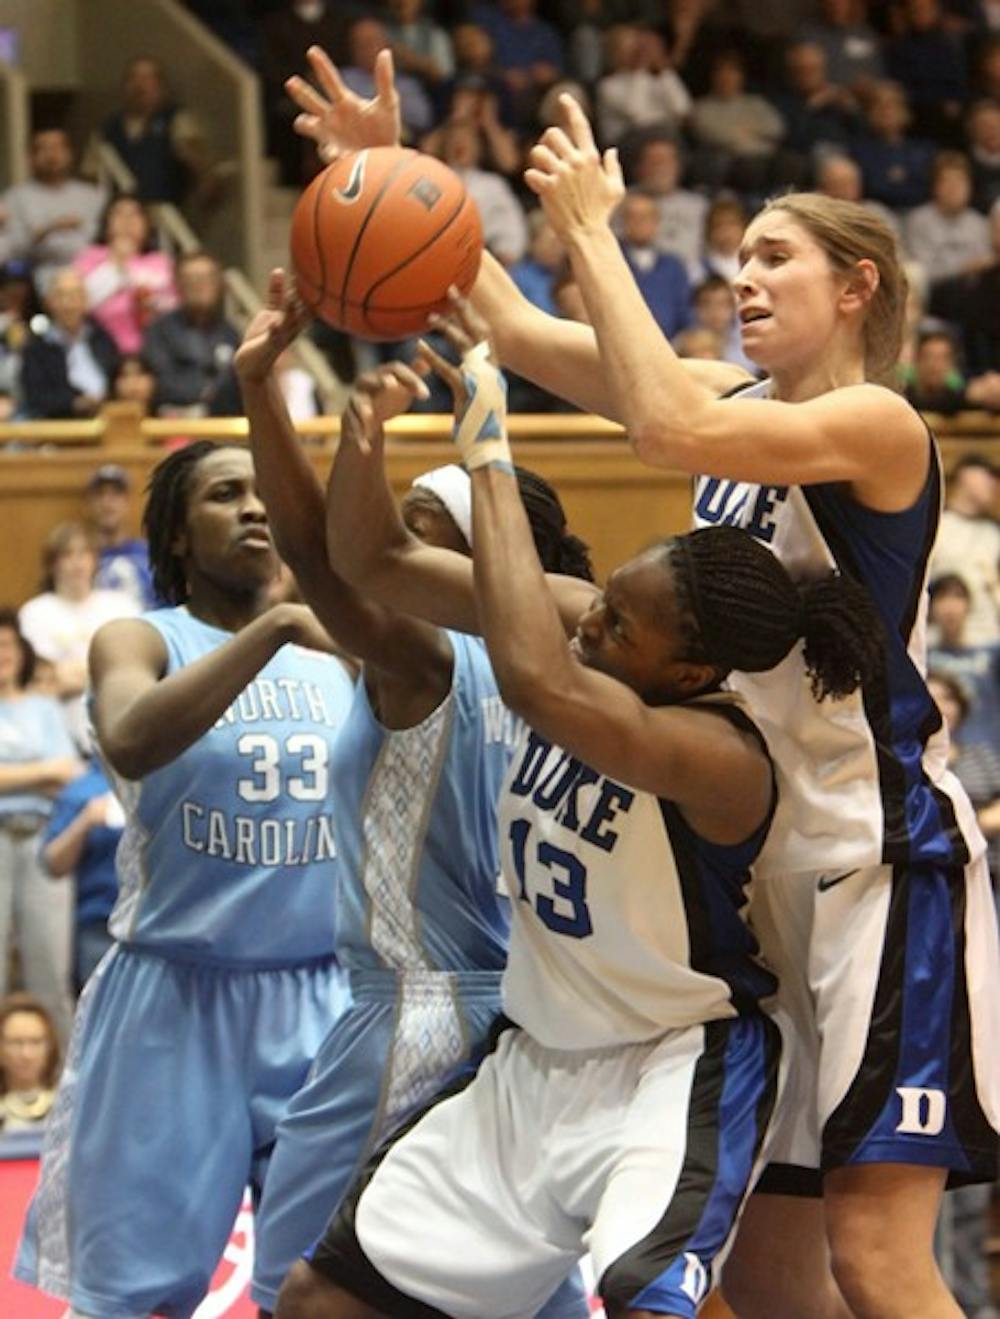 No. 8 Duke outrebounded No. 18 North Carolina 52-28 Monday night in its dominant 79-51 victory. DTH/ Phong Dinh